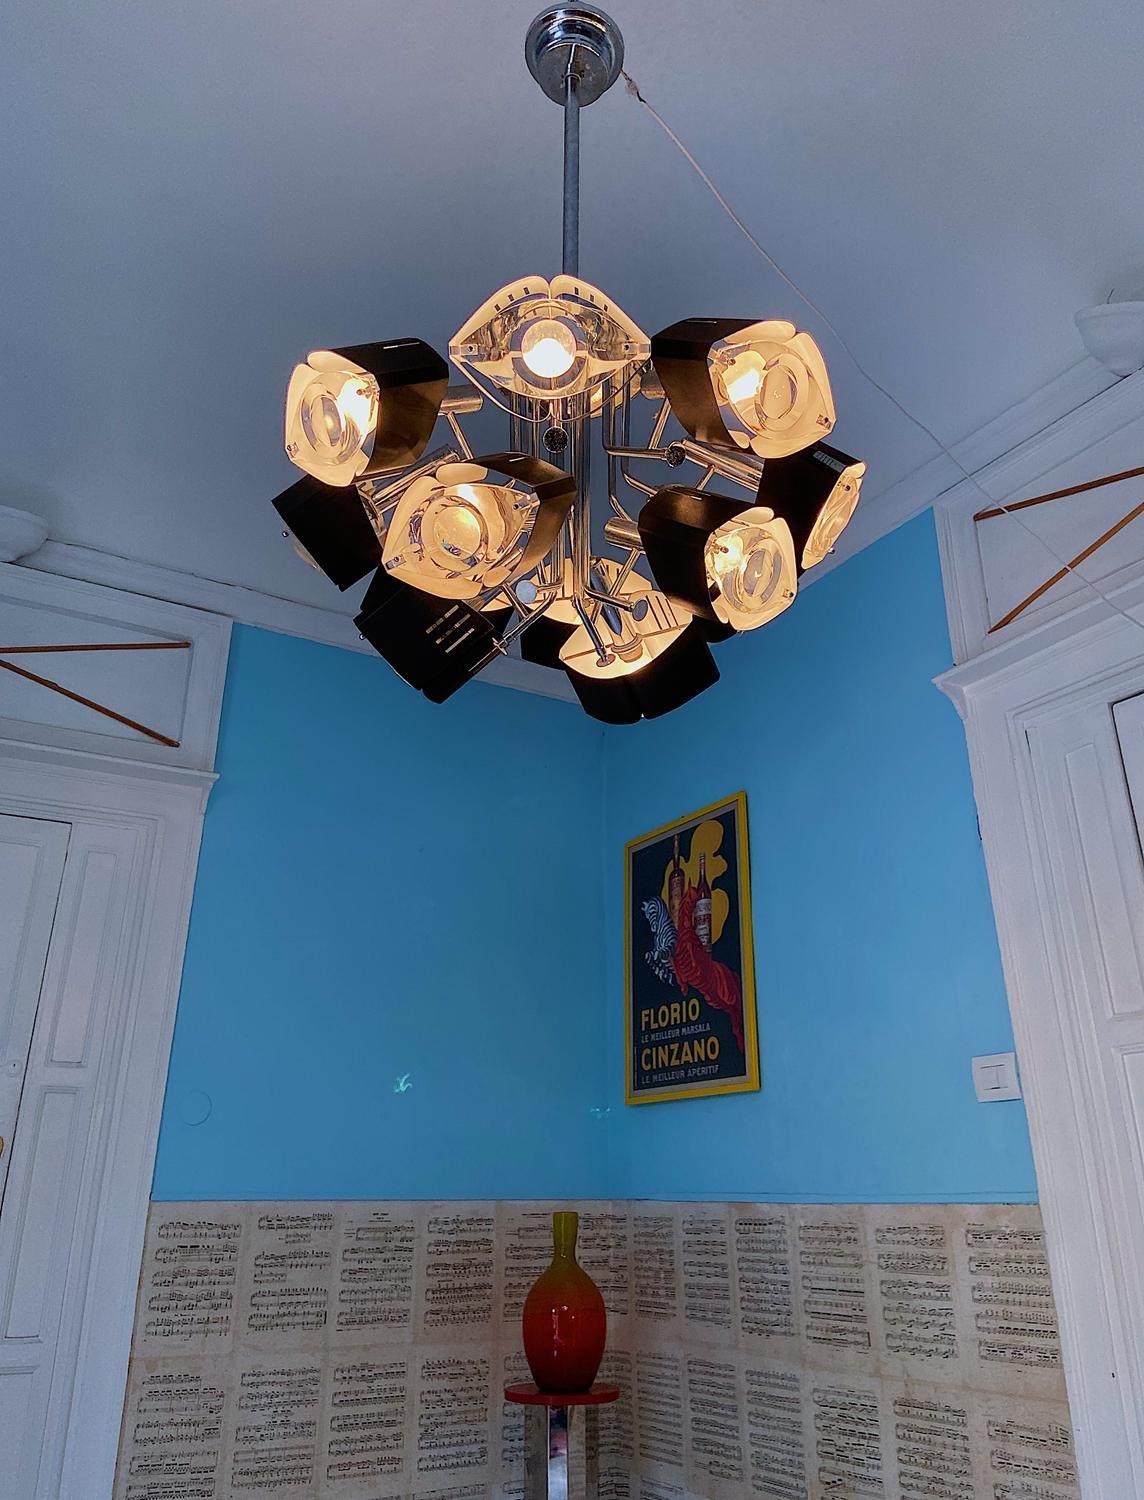 Super rare ceiling light designed by Oscar Torlasco. Made in Italy in the 1970s. 12 light bulbs. The glass lenses are in Murano glas. Each lentic glass are set in a metal structure with a mouth shape. 
Torlascos eclectic designs ranged in style